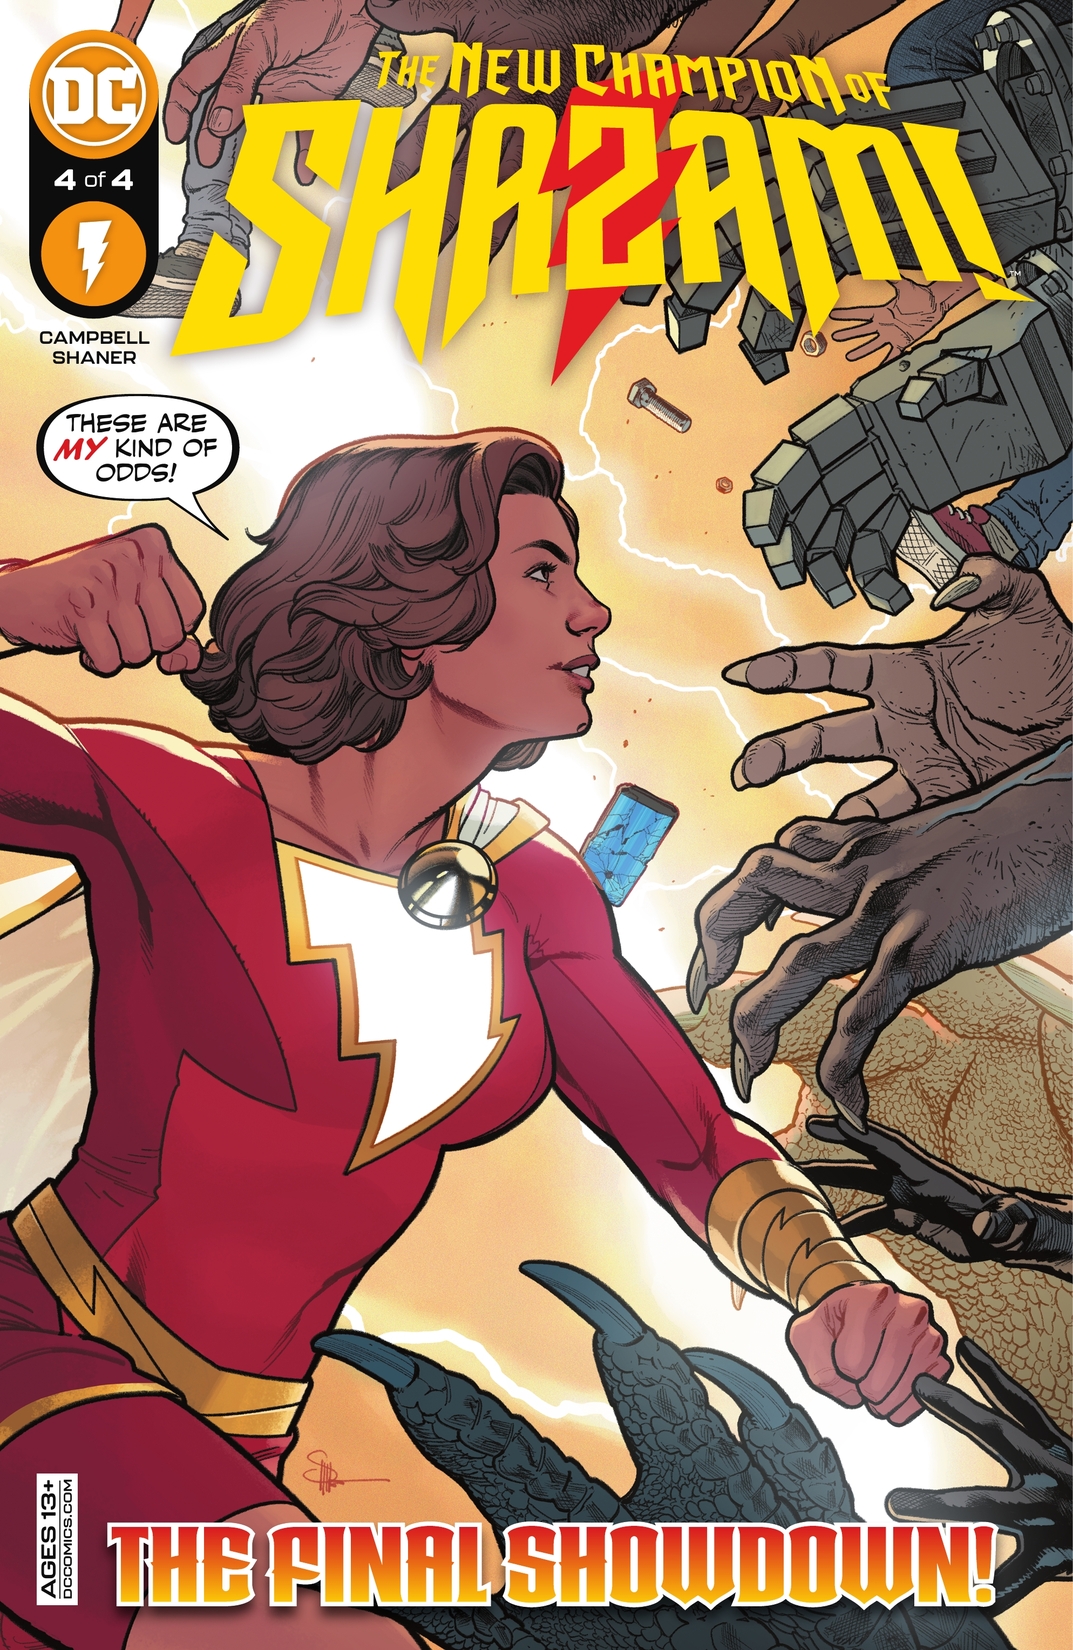 The New Champion of Shazam! #4 preview images